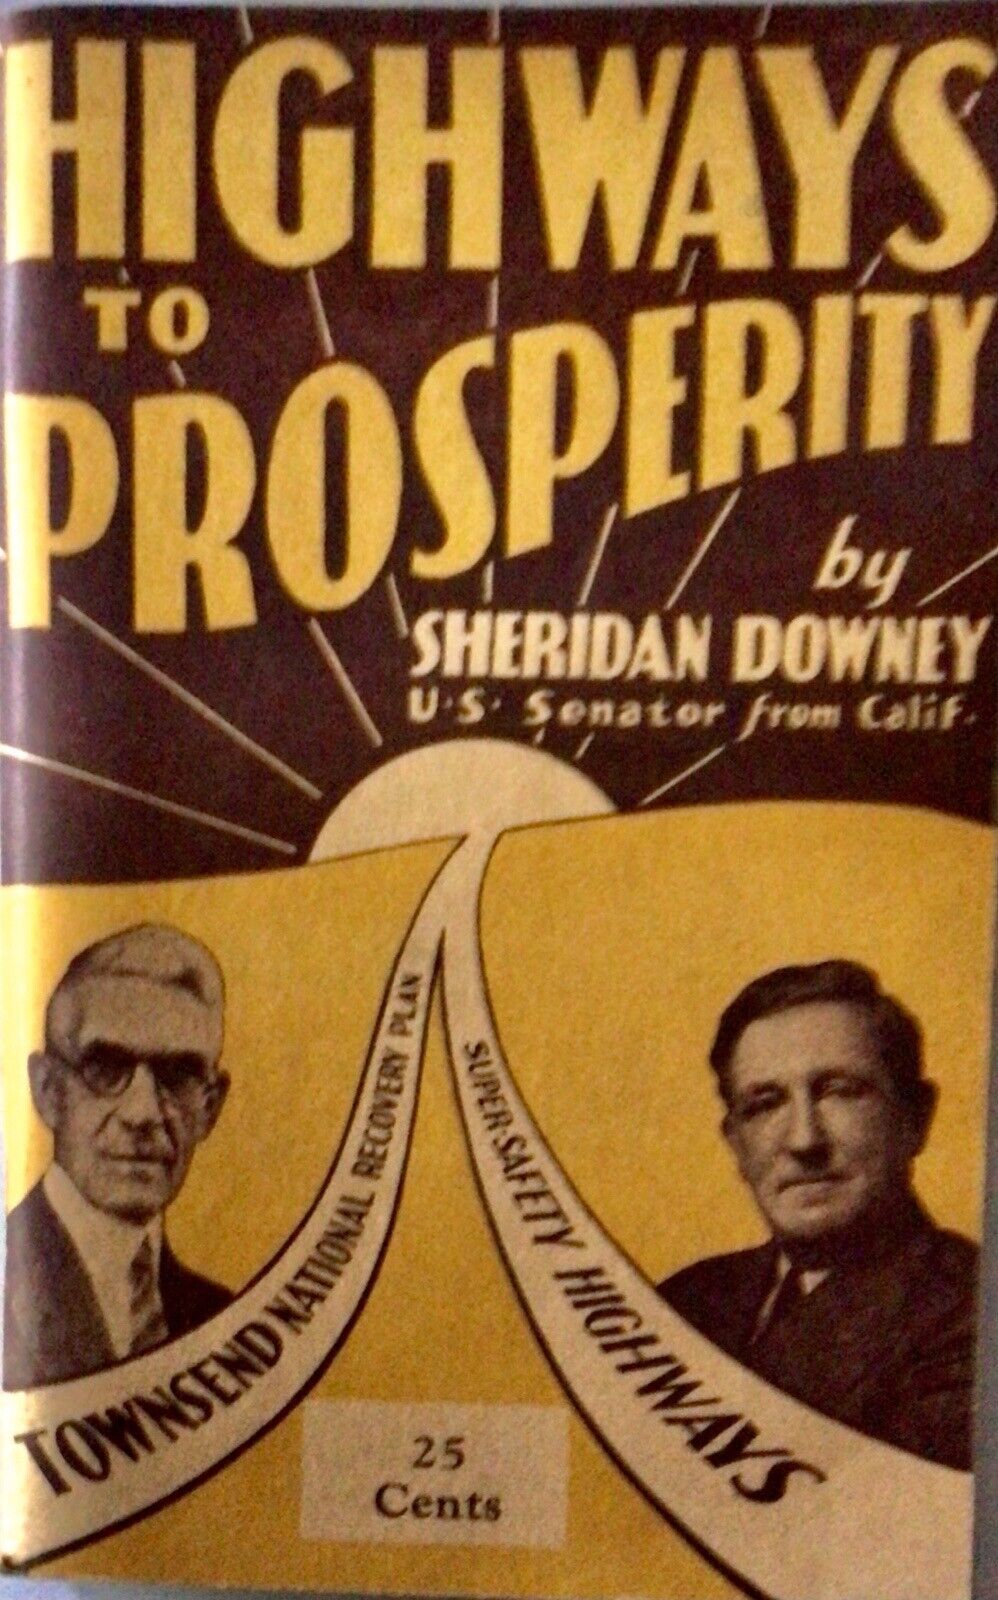 Highways to Prosperity from 1940 US Senator Sheridan Downey  158 page Booklet